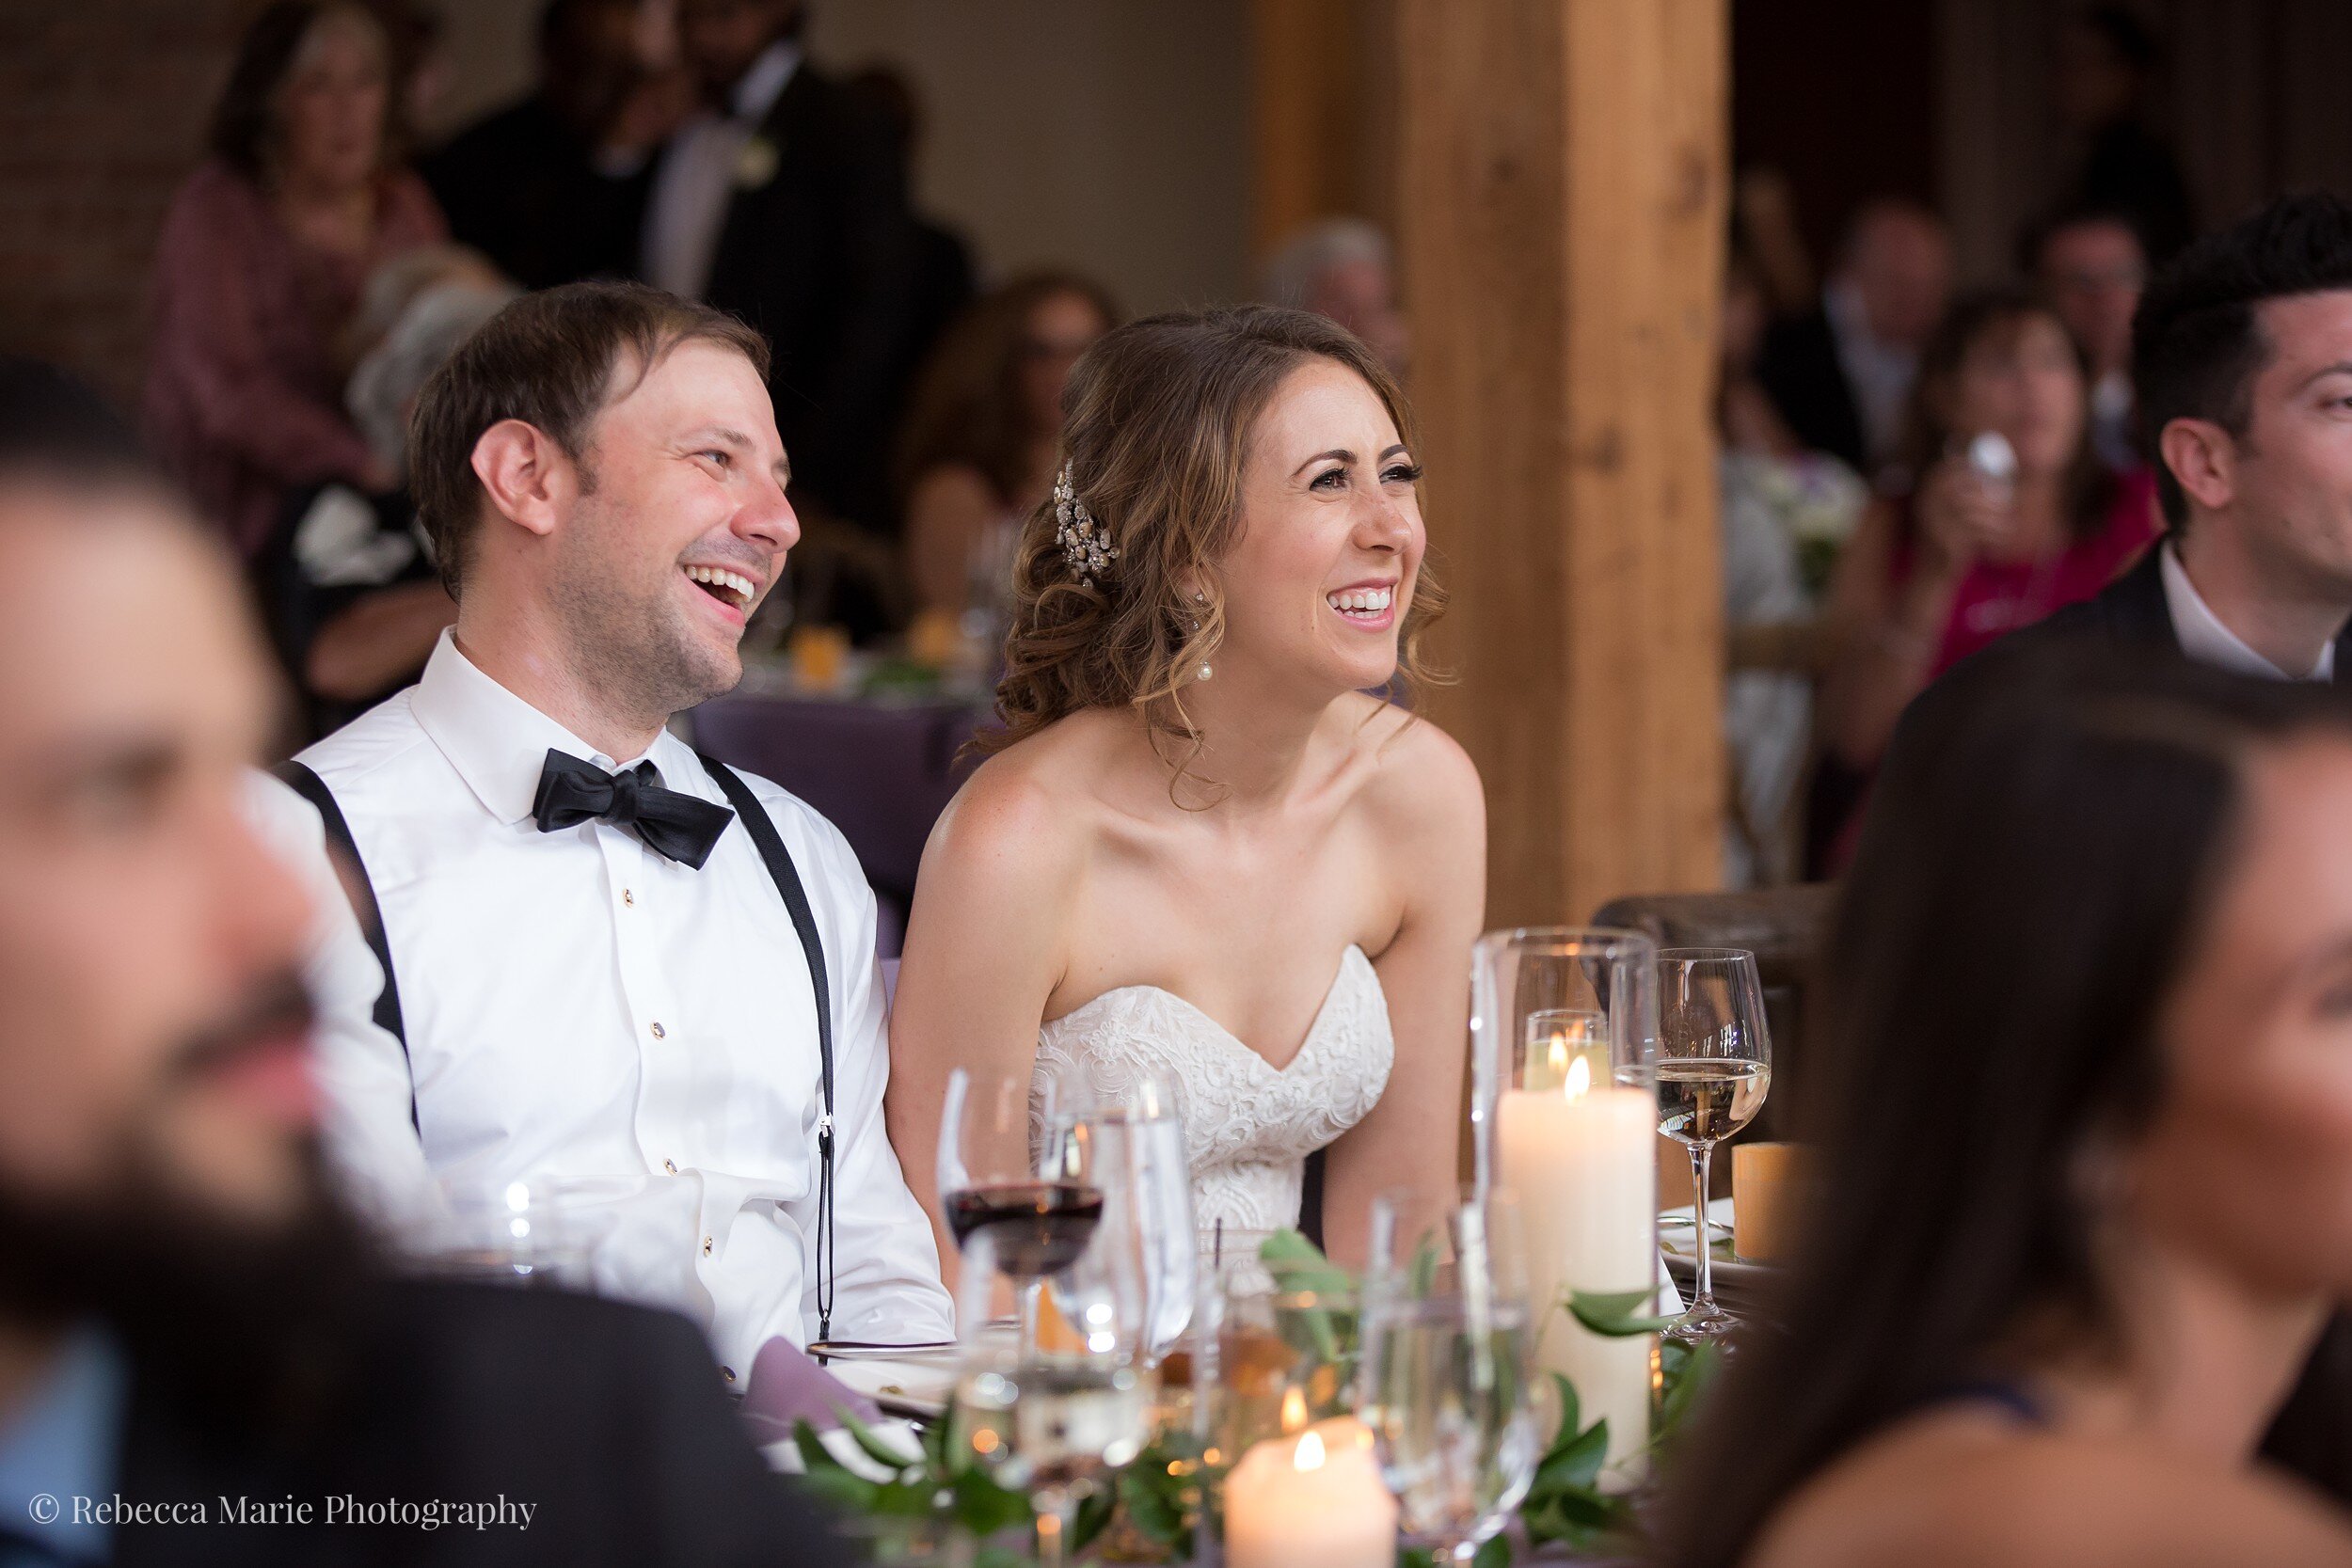 Reactions to funny wedding toast